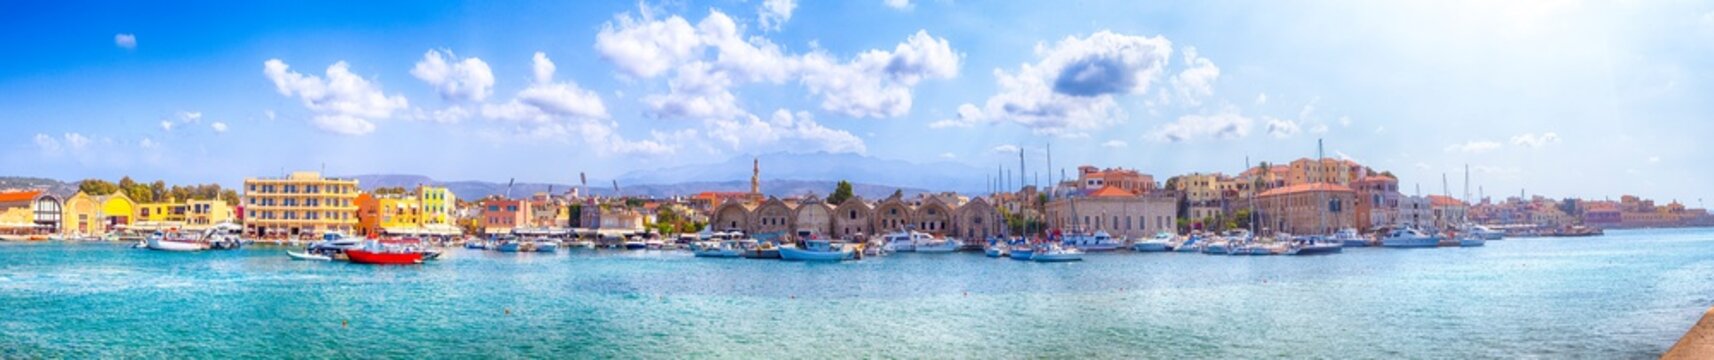 Travel Concepts and ideas. Panoramic Image of Chania Old City and Ancient Venetian Port Taken From Lighthouse Pier in Crete, Greece.